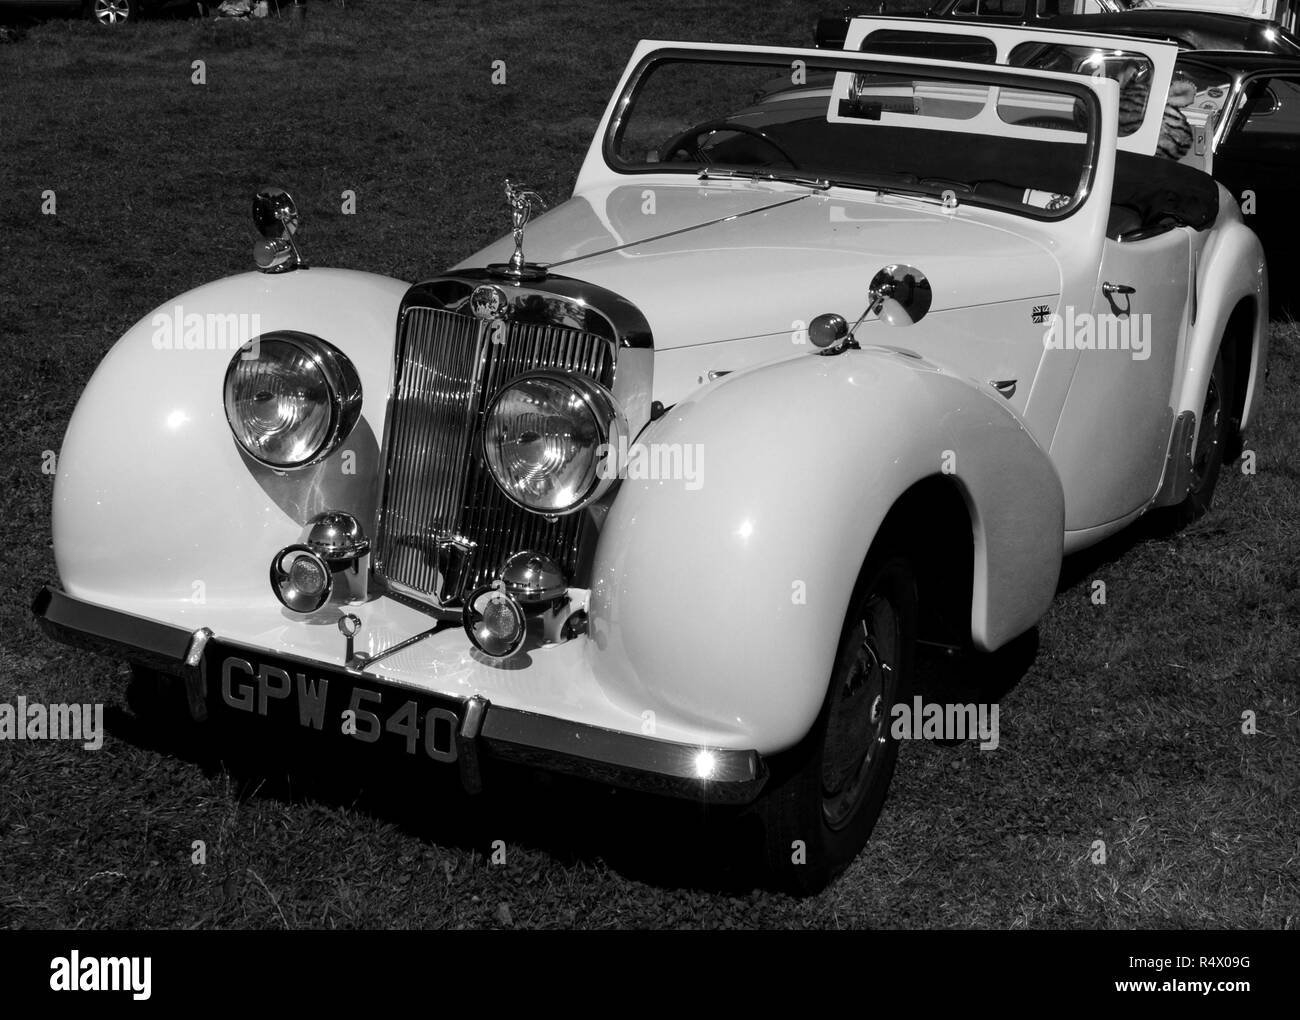 1947 Trionfo 1800 Roadster a Epping Ongar Ferrovia 2017 Veicolo Vintage Rally, North Weald Stazione, Essex, UK. Foto Stock